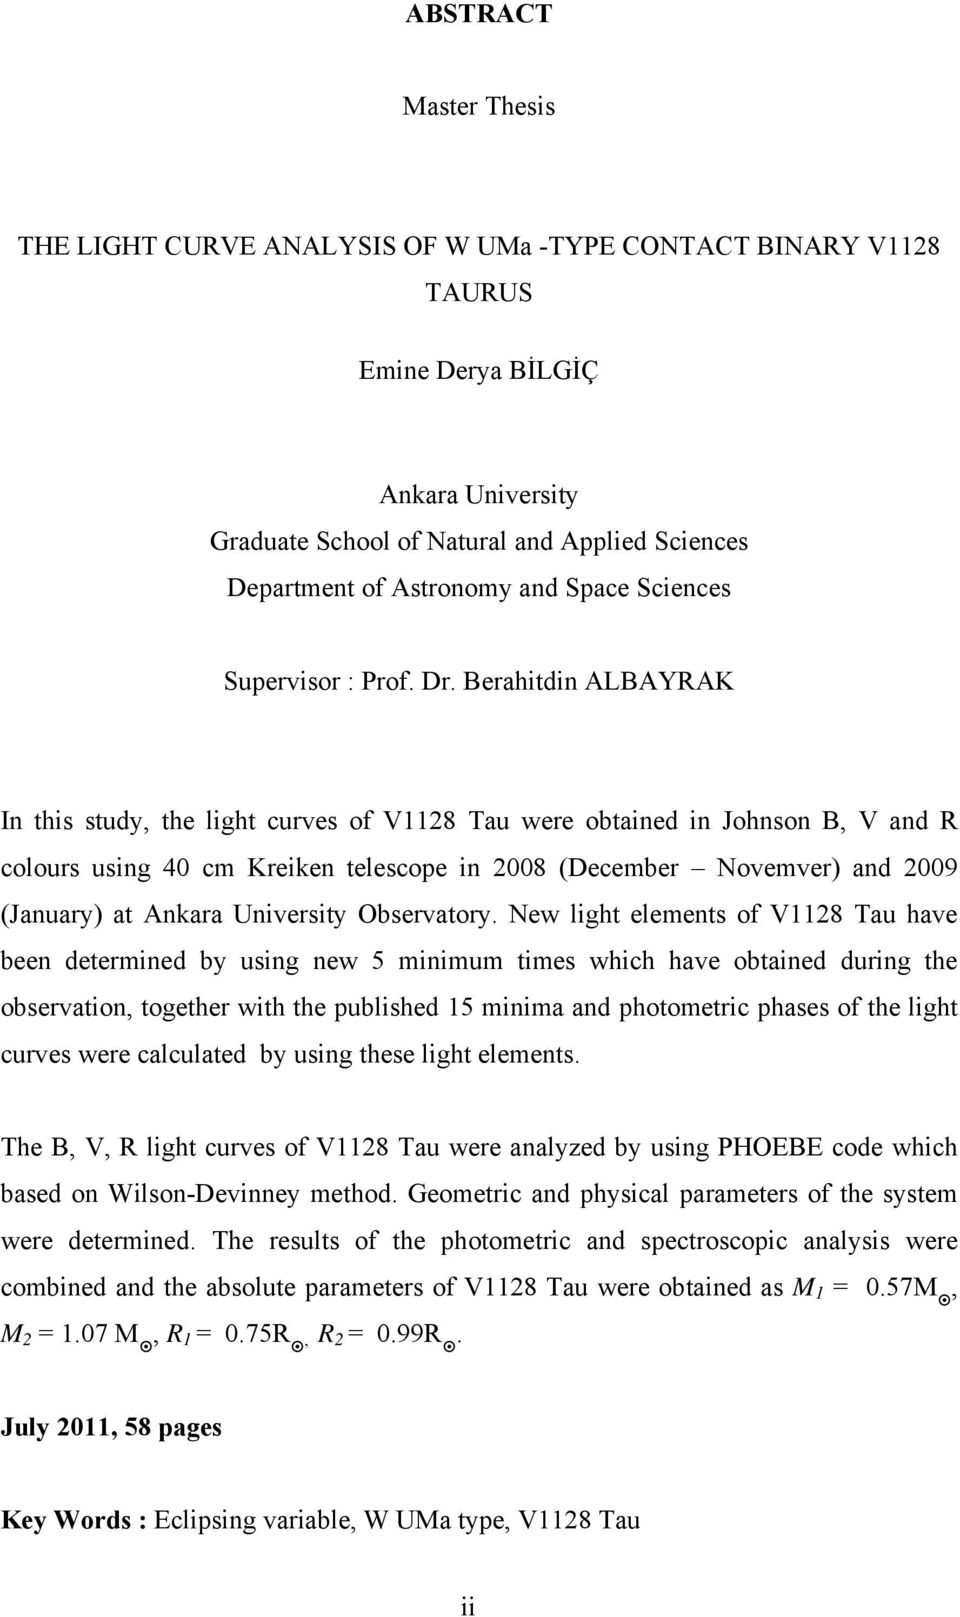 Berahitdin ALBAYRAK In this study, the light curves of V1128 Tau were obtained in Johnson B, V and R colours using 40 cm Kreiken telescope in 2008 (December Novemver) and 2009 (January) at Ankara